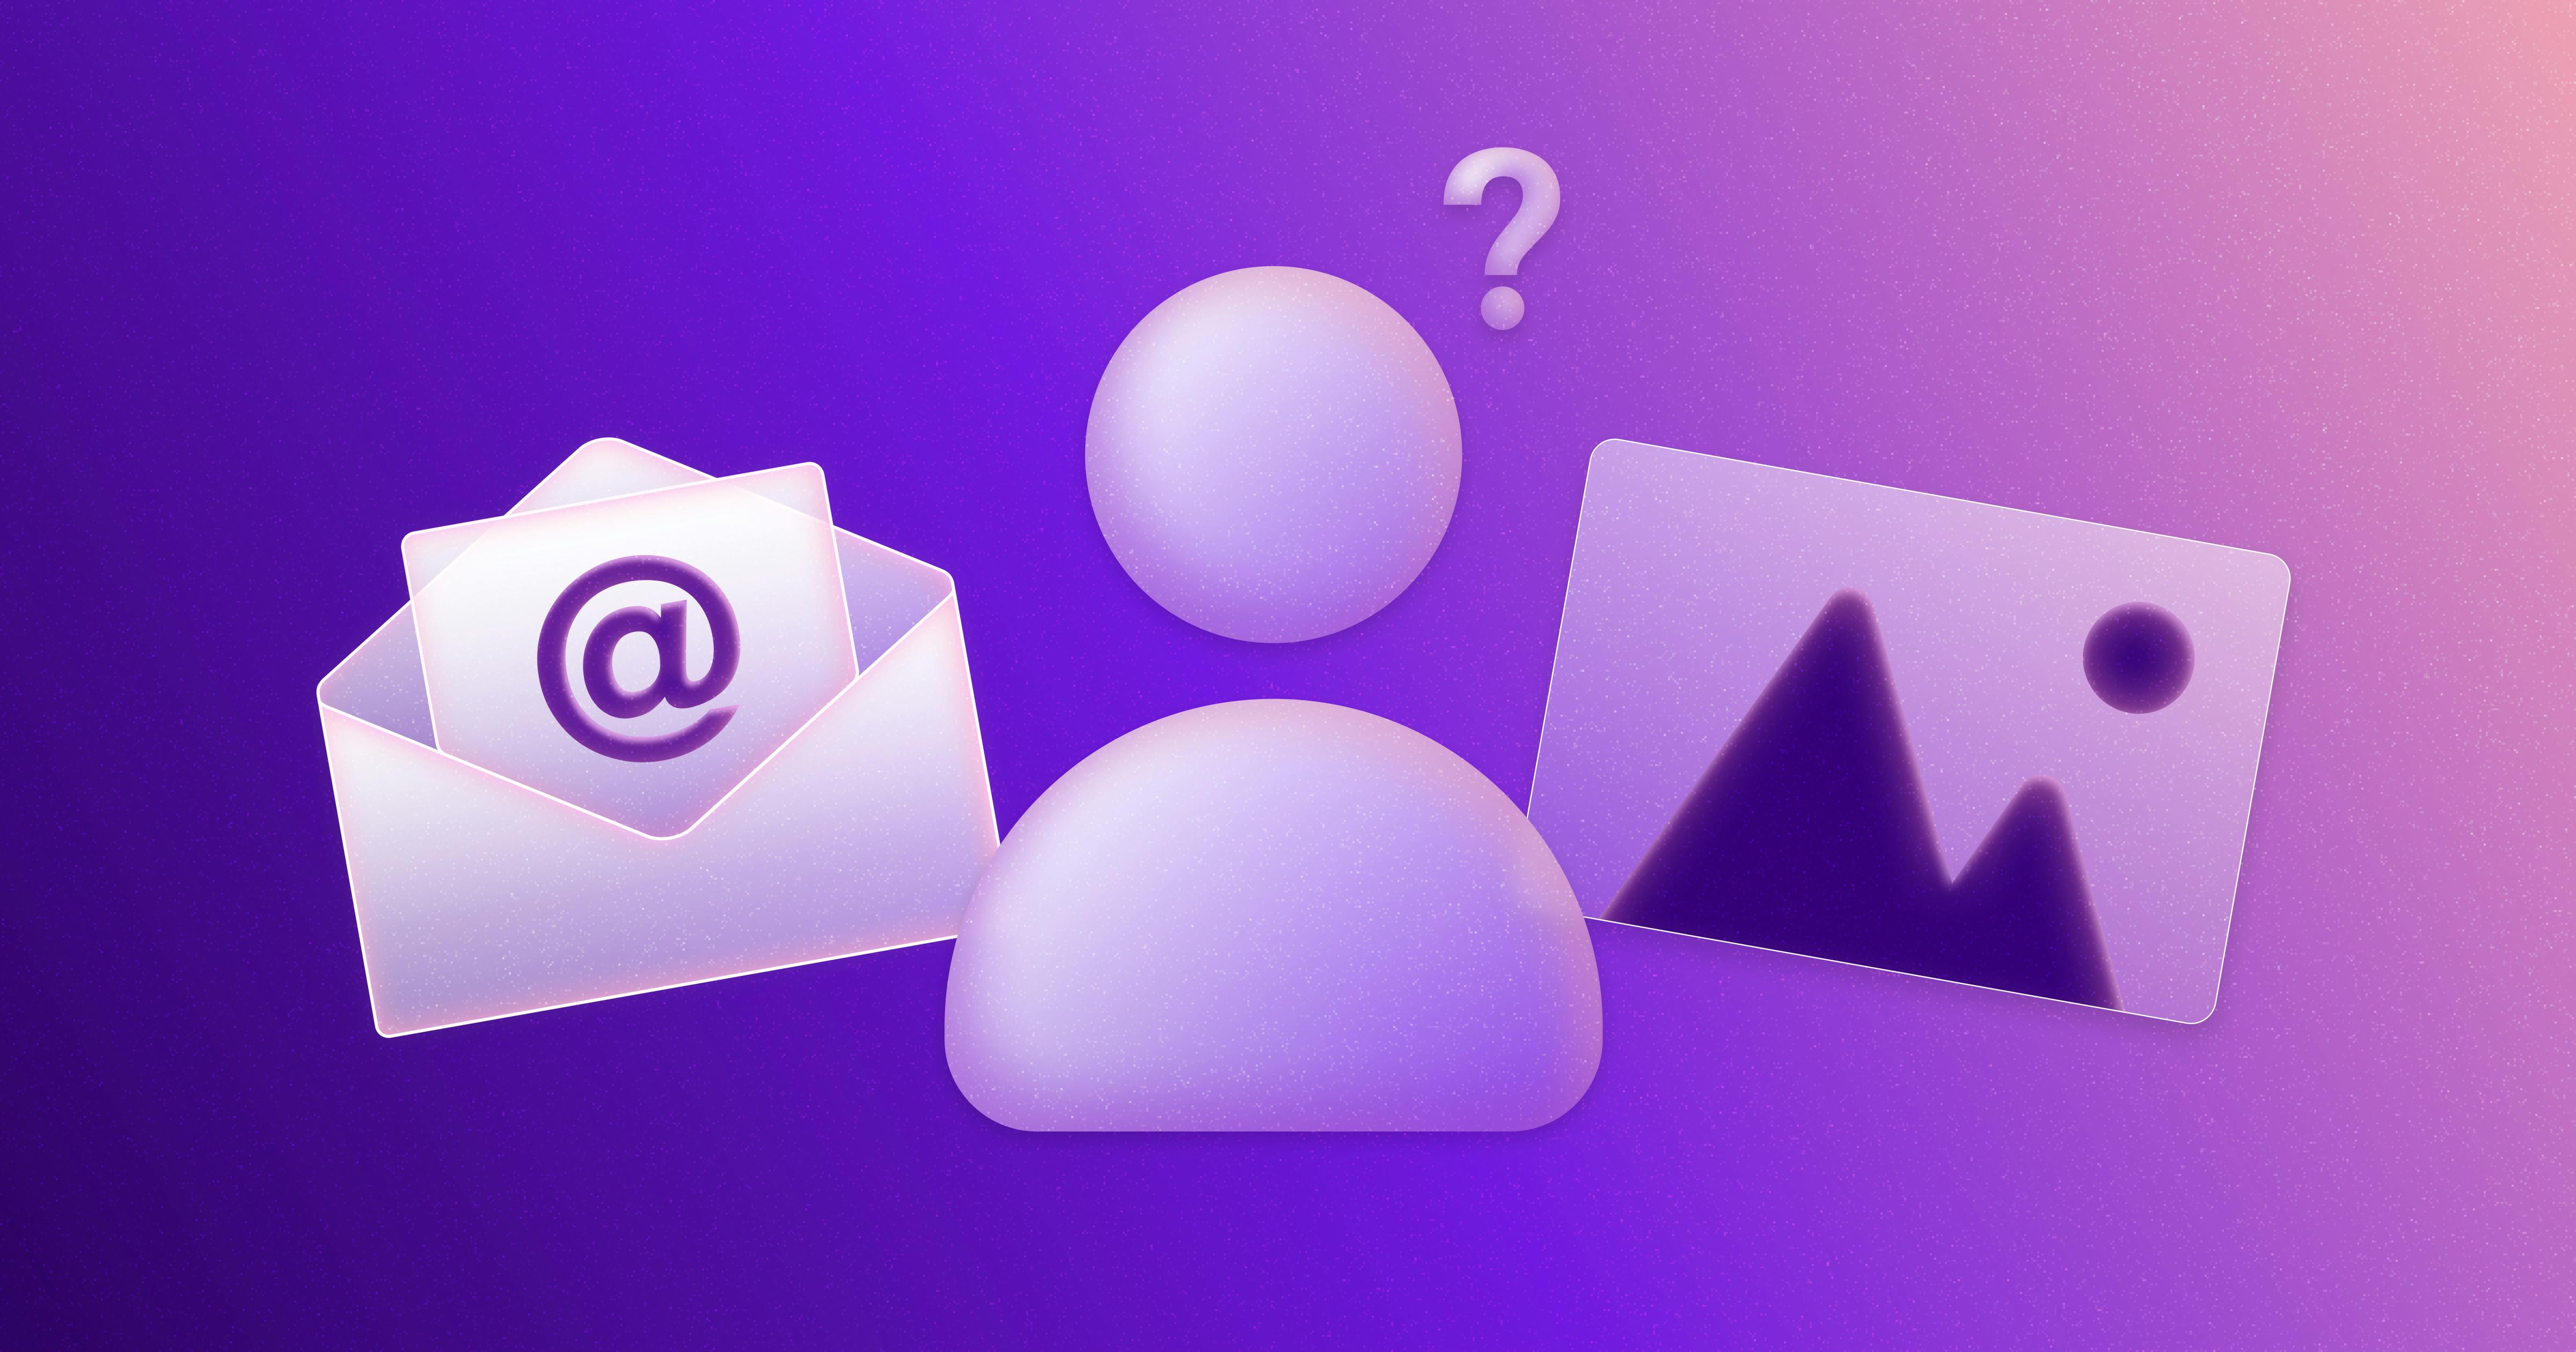 An icon of a person with a question mark above their head. On the person's left is an icon of an email. On their right is an icon of an image.